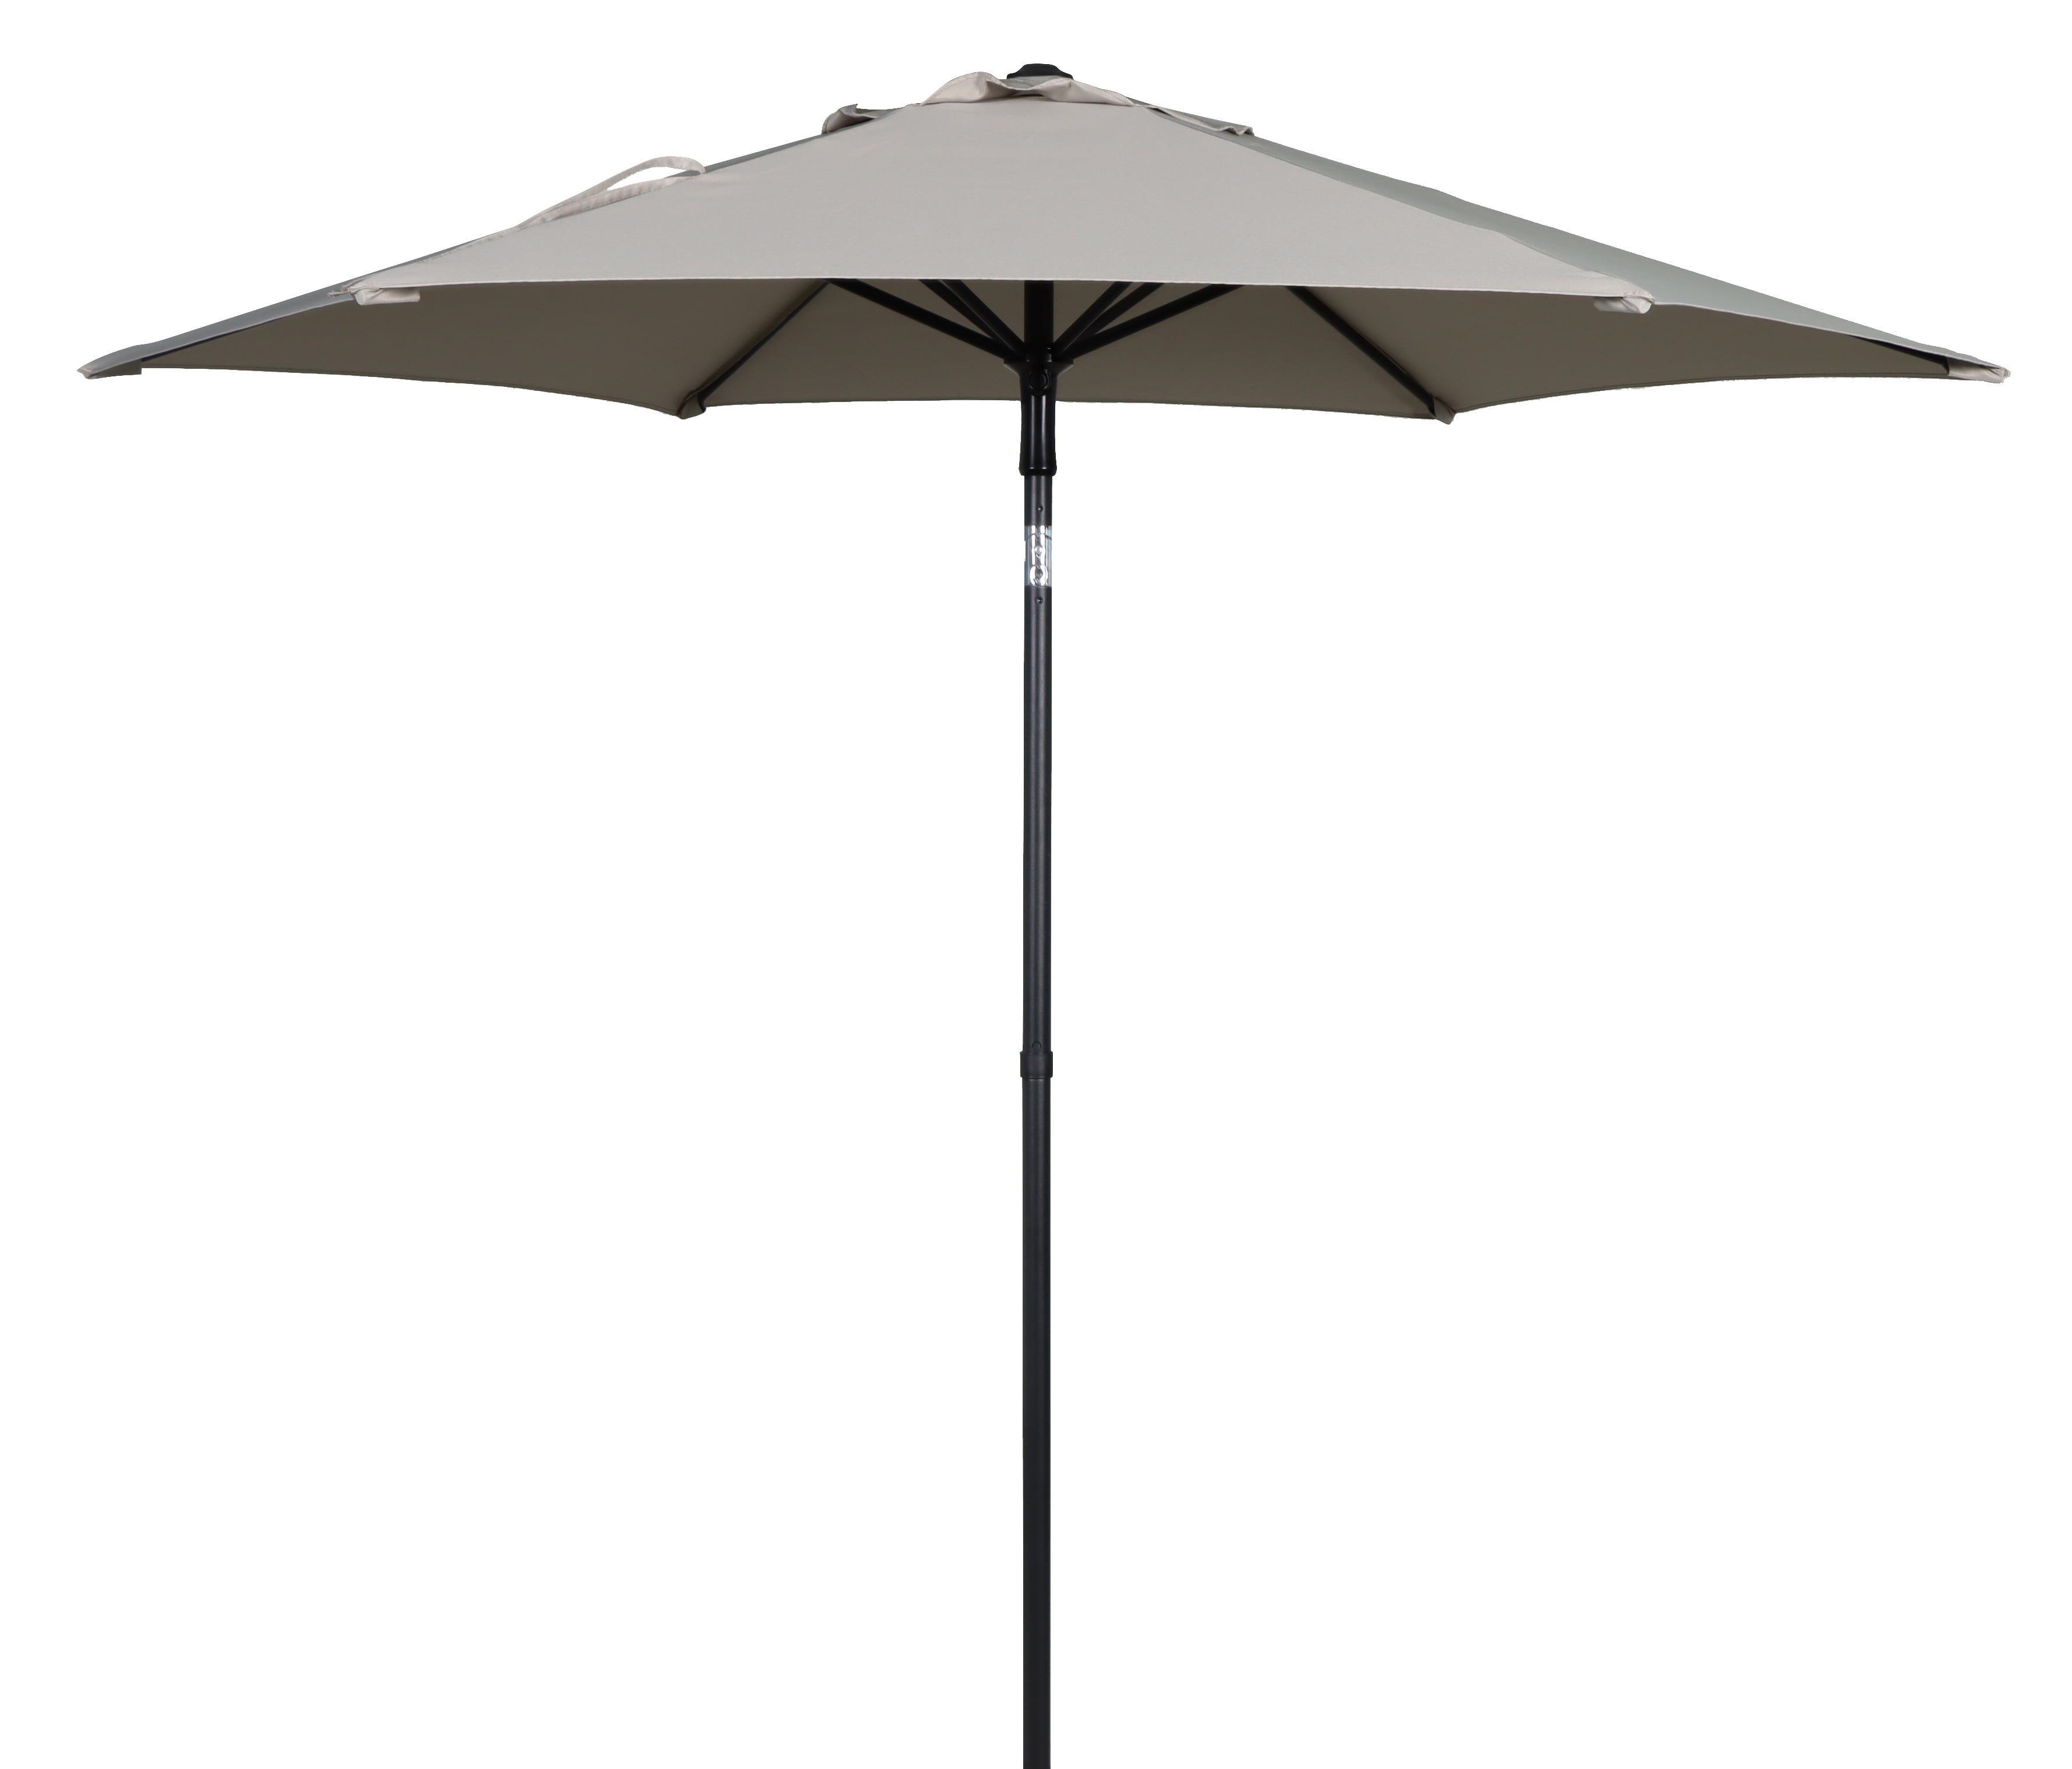 Mainstays 7.5ft Stone Round Outdoor Tilting Market Patio Umbrella with Push-up Function